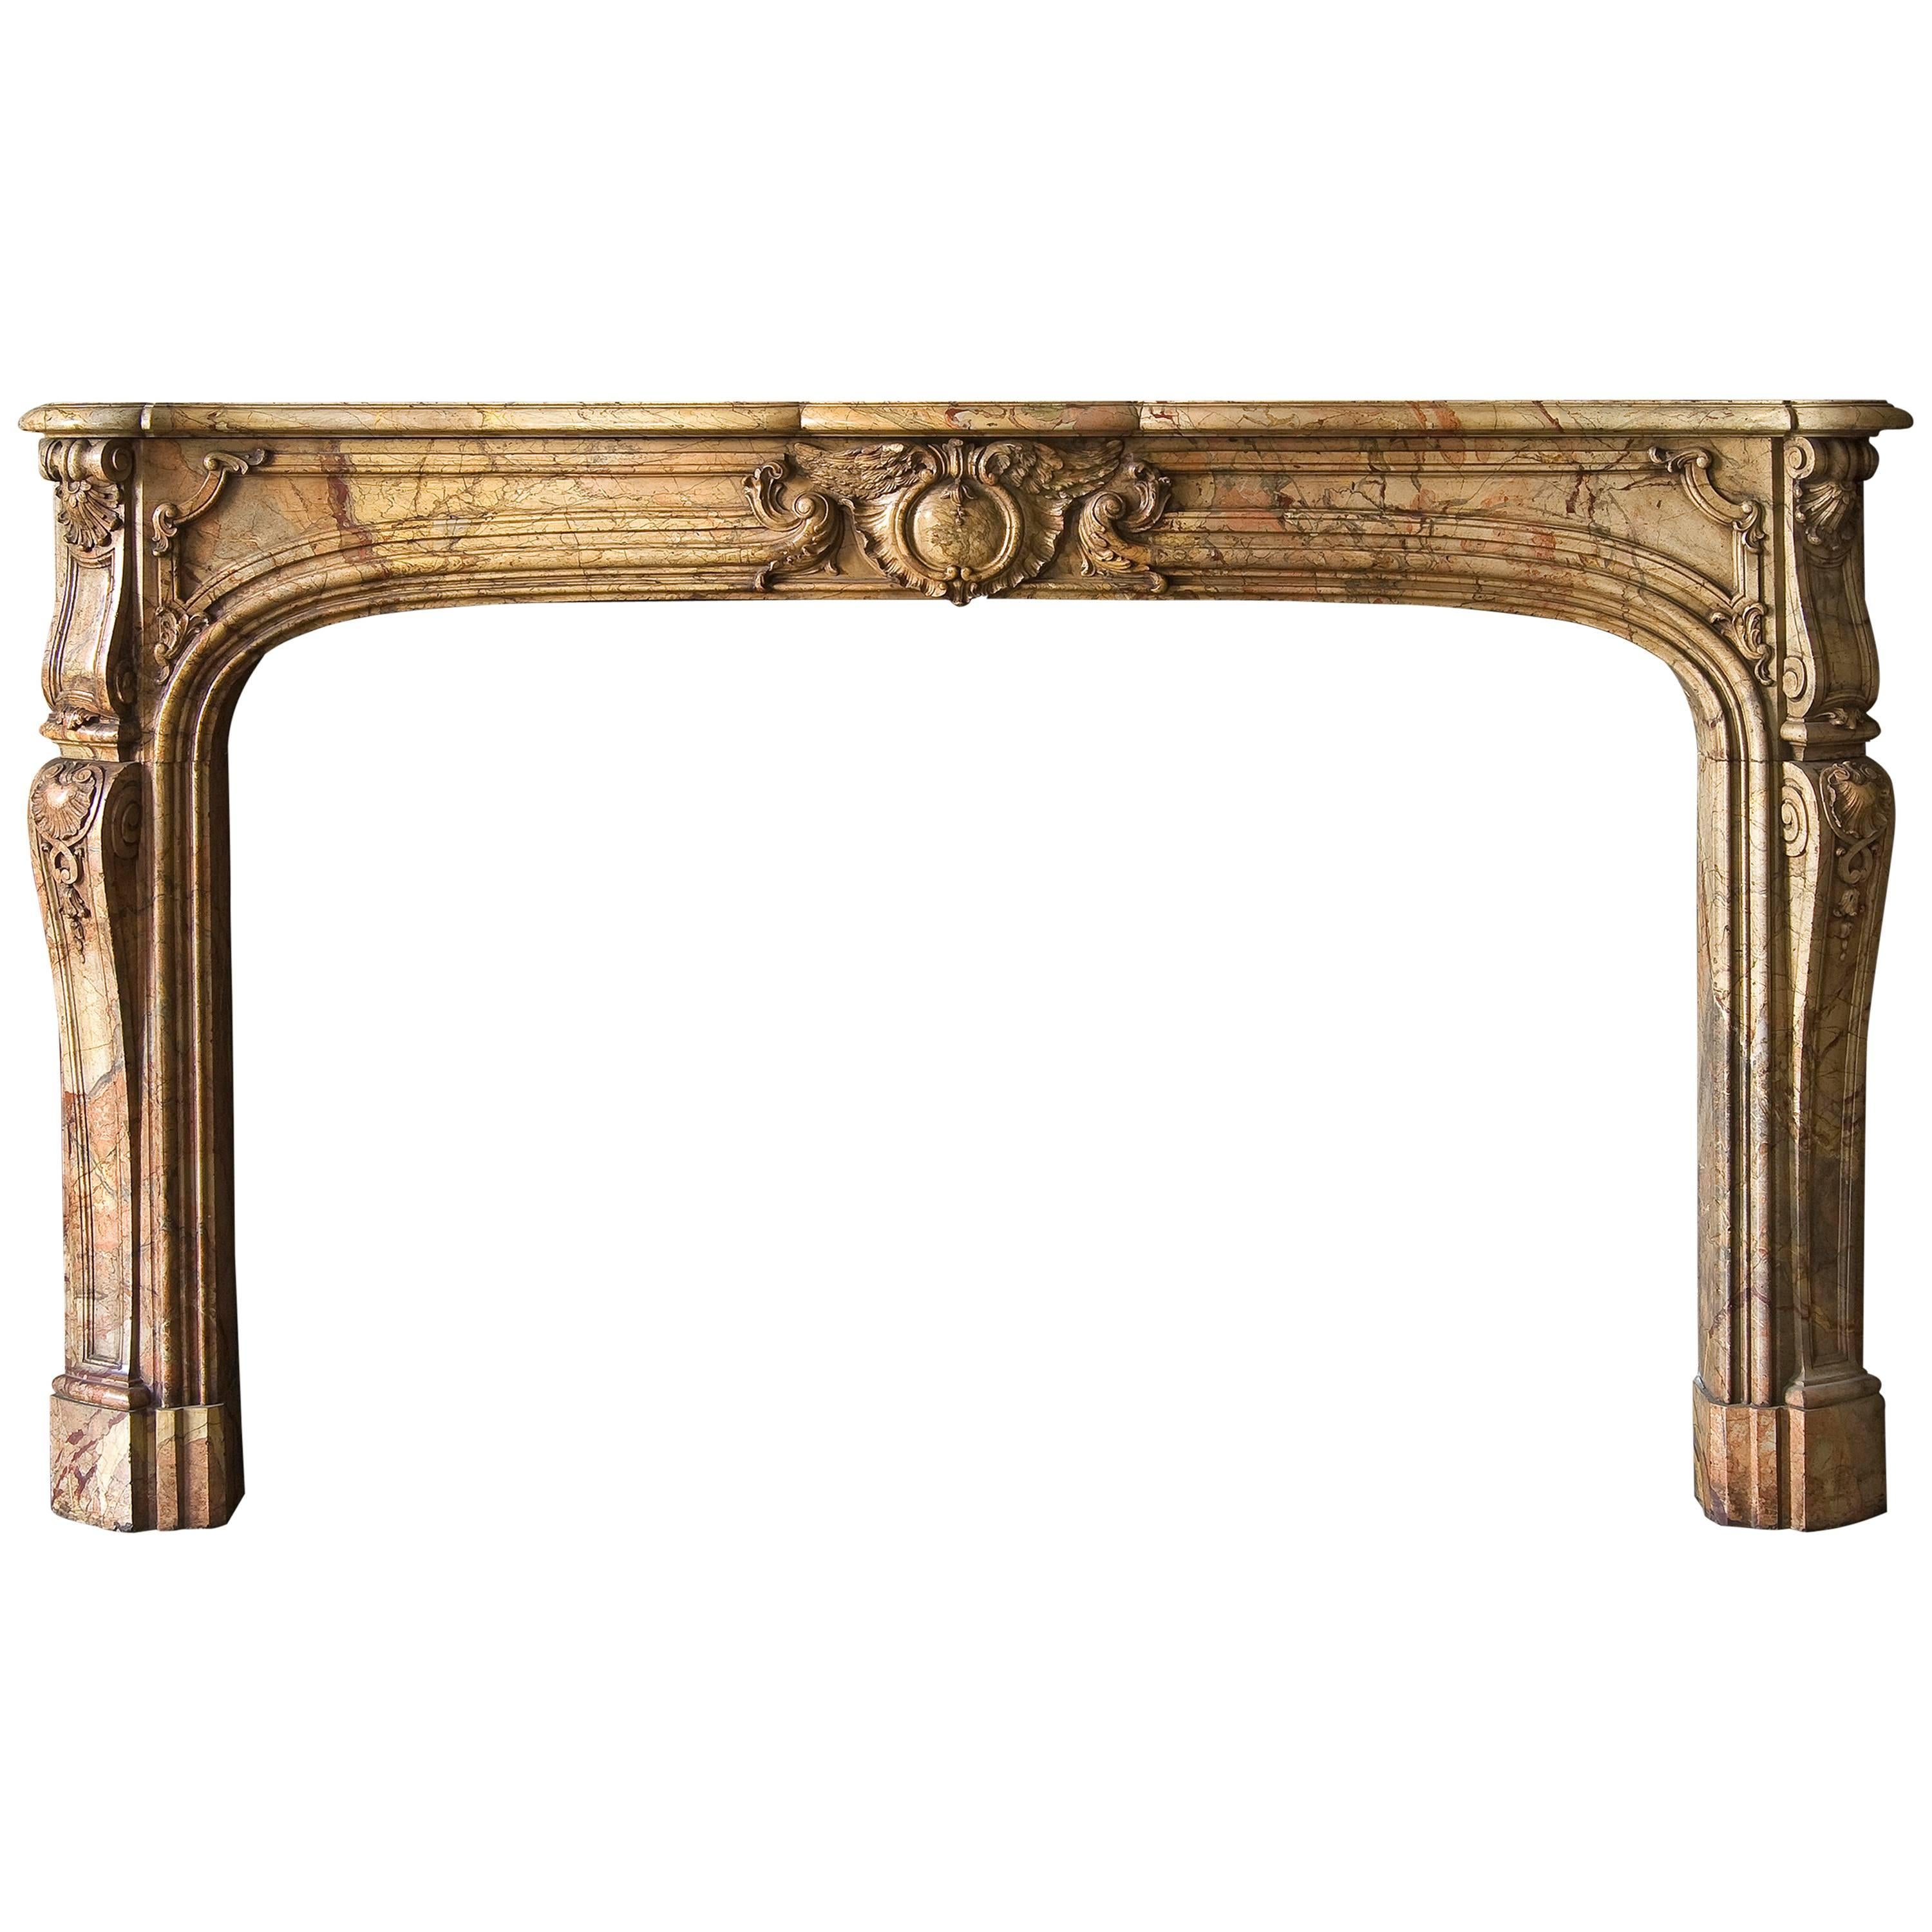 Beautiful Fireplace in Saracolin, Louis XV Period, 18th Century For Sale